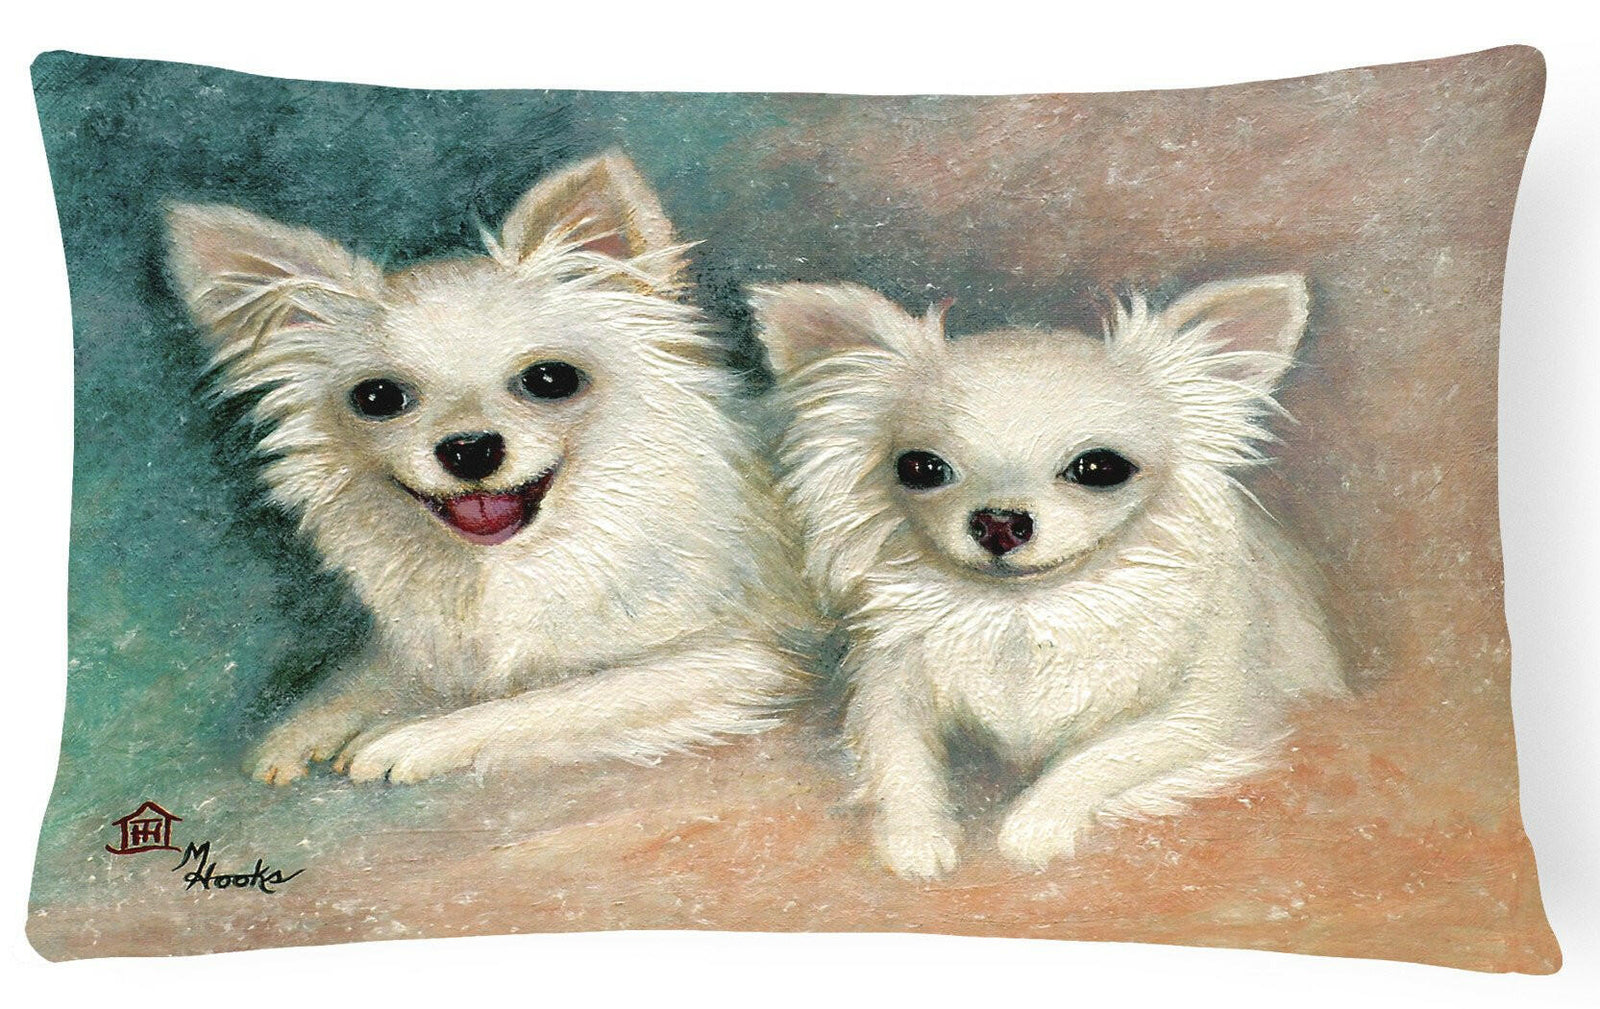 Chihuahua The Siblings Fabric Decorative Pillow MH1064PW1216 by Caroline's Treasures